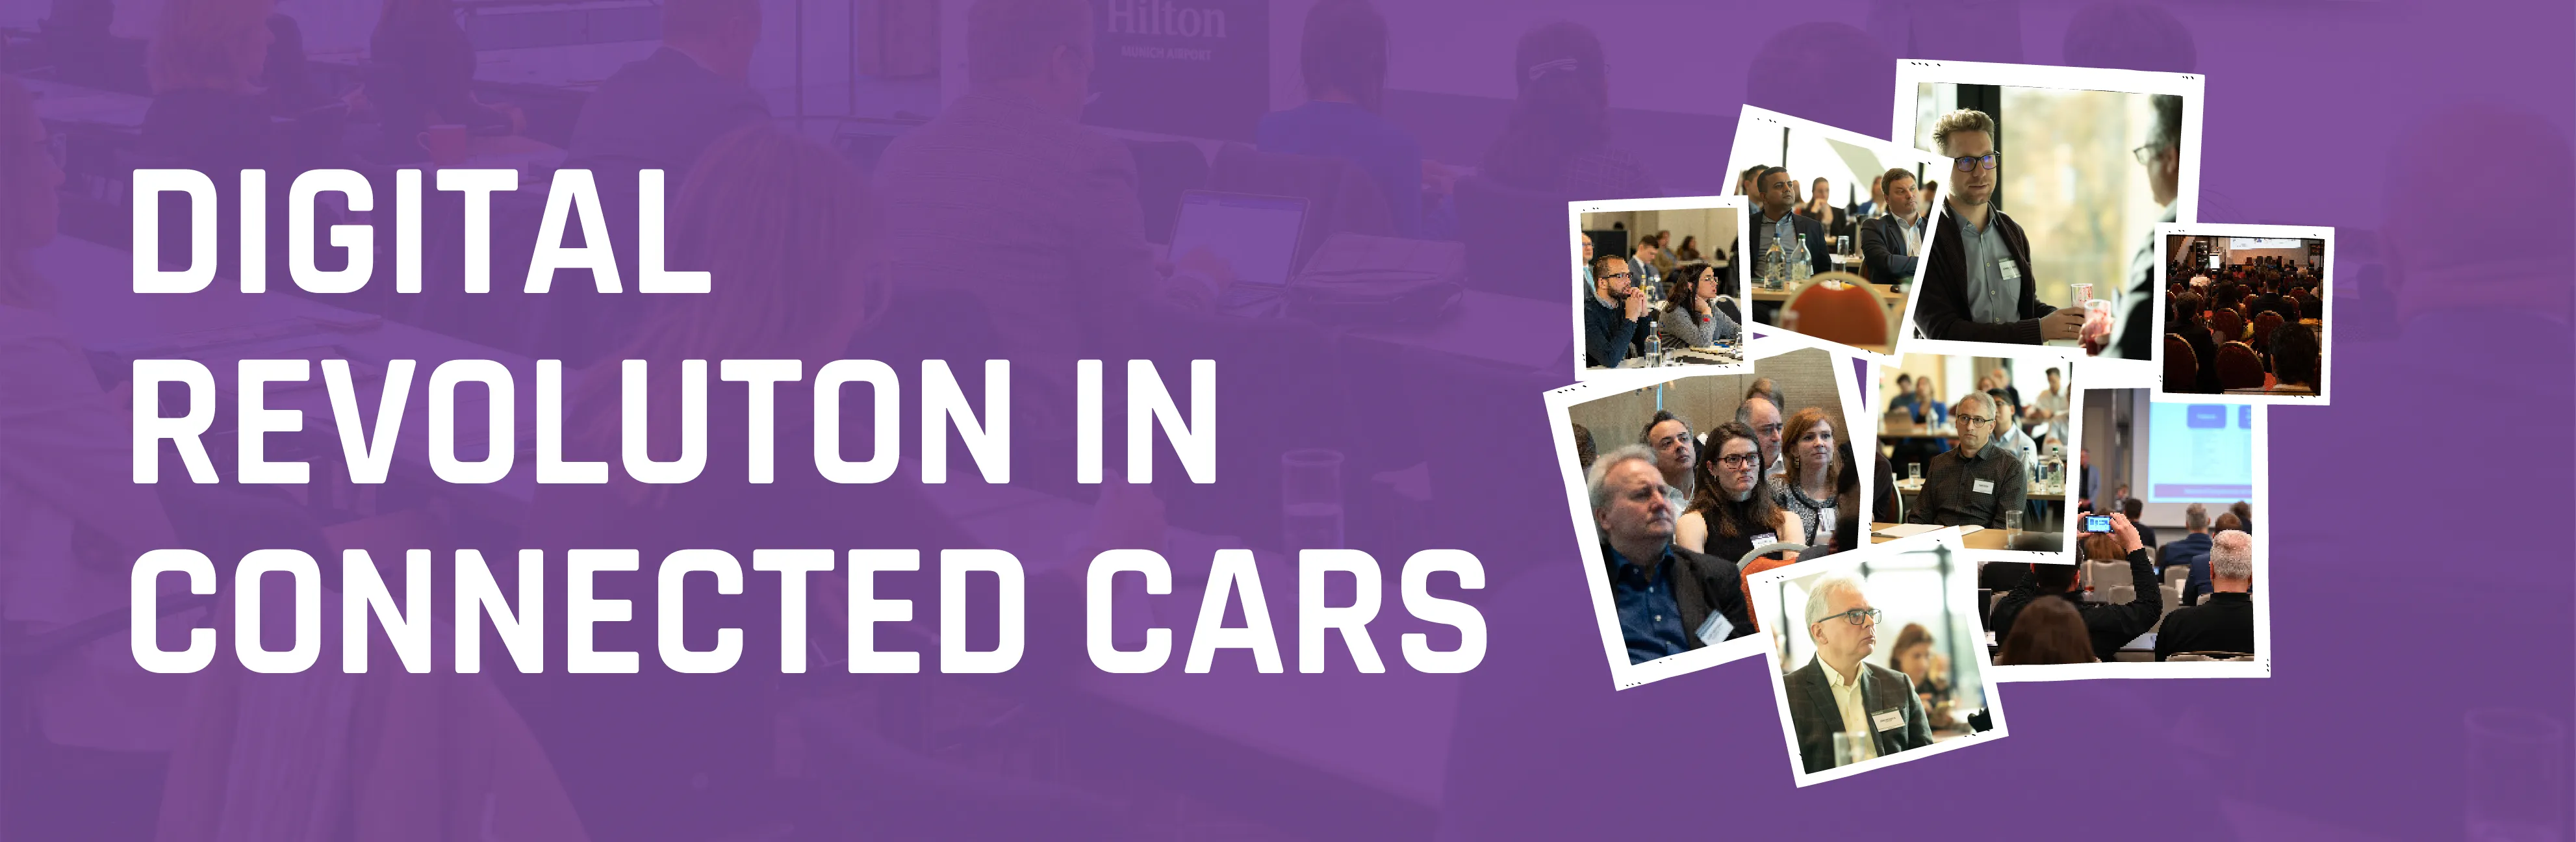 Connected Cars Conferences